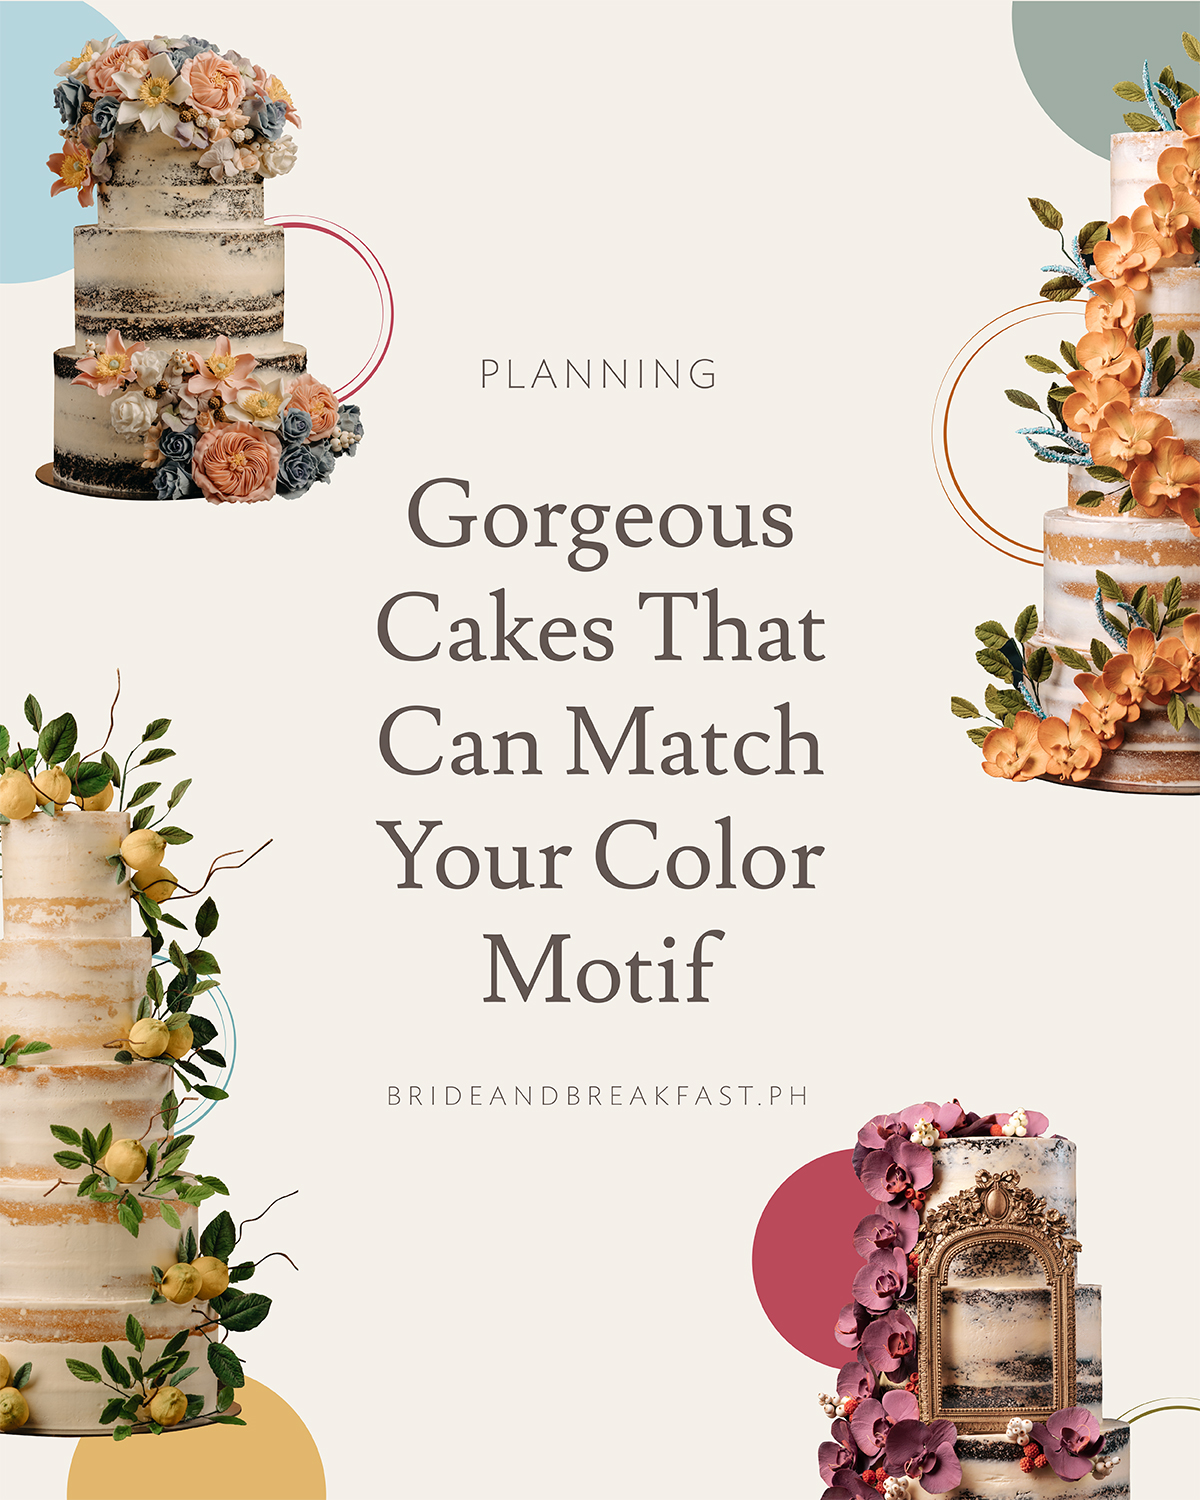 8 Gorgeous Cakes That Can Match Your Color Motif